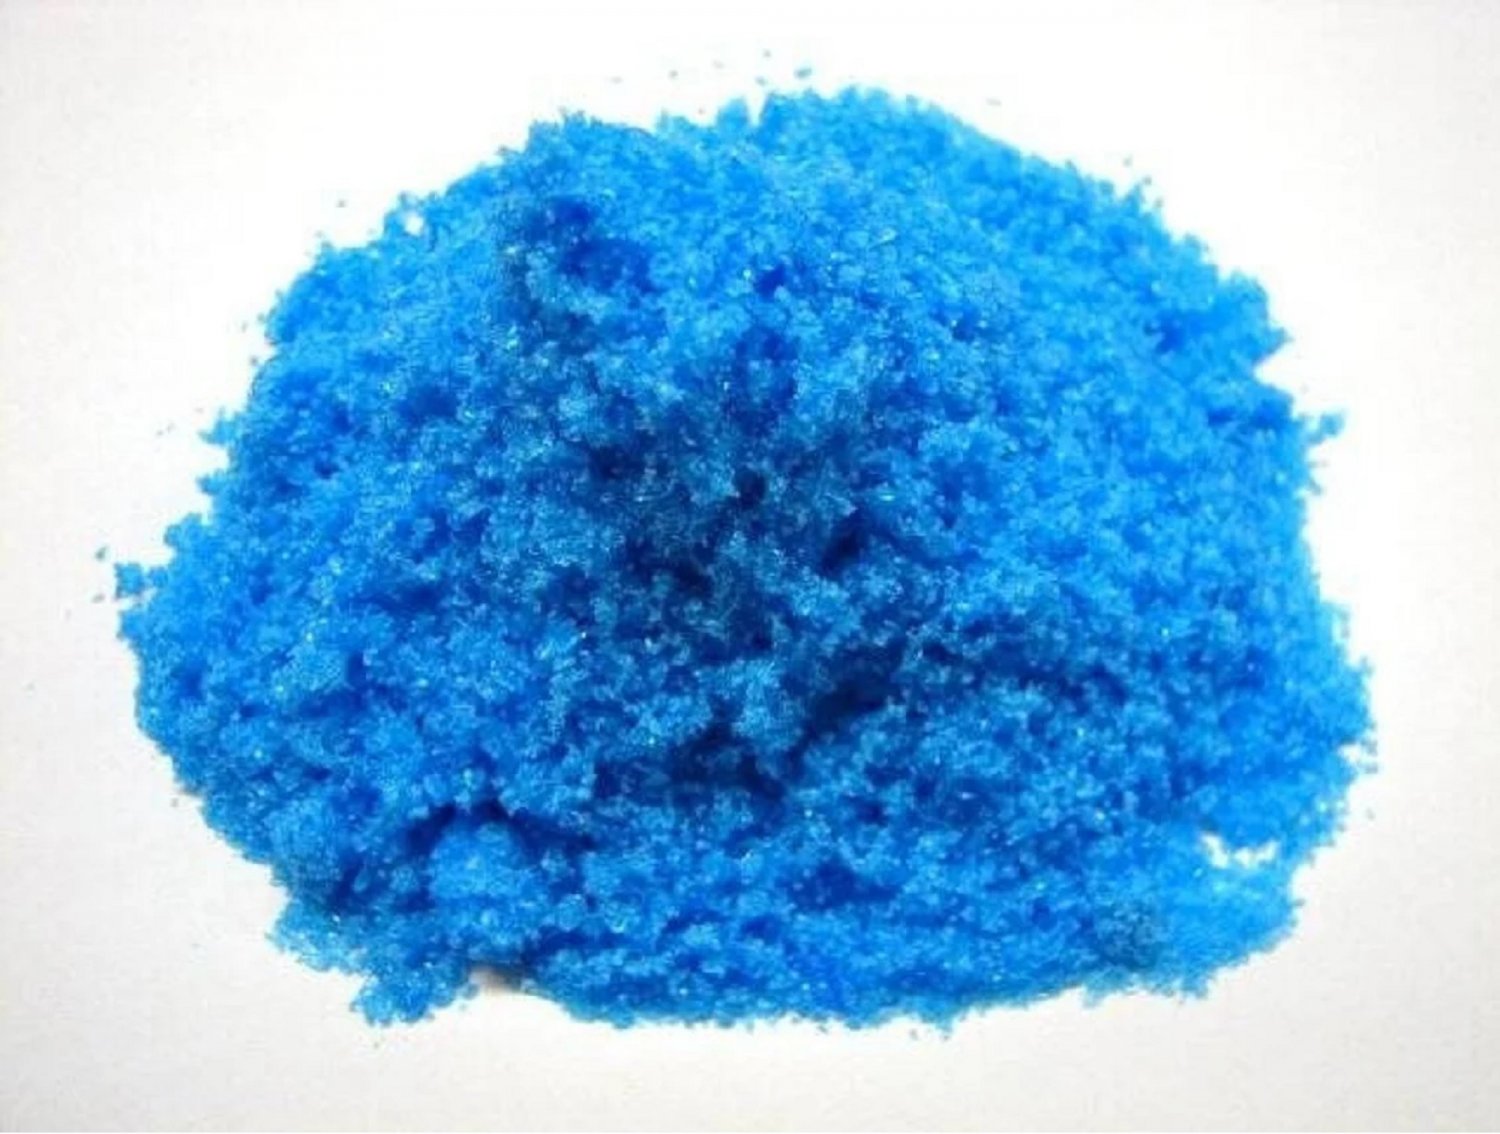 COPPER SULPHATE Pentahydrate 1000g - 2,20lb - 35.27oz - Fine Crystals 99 %